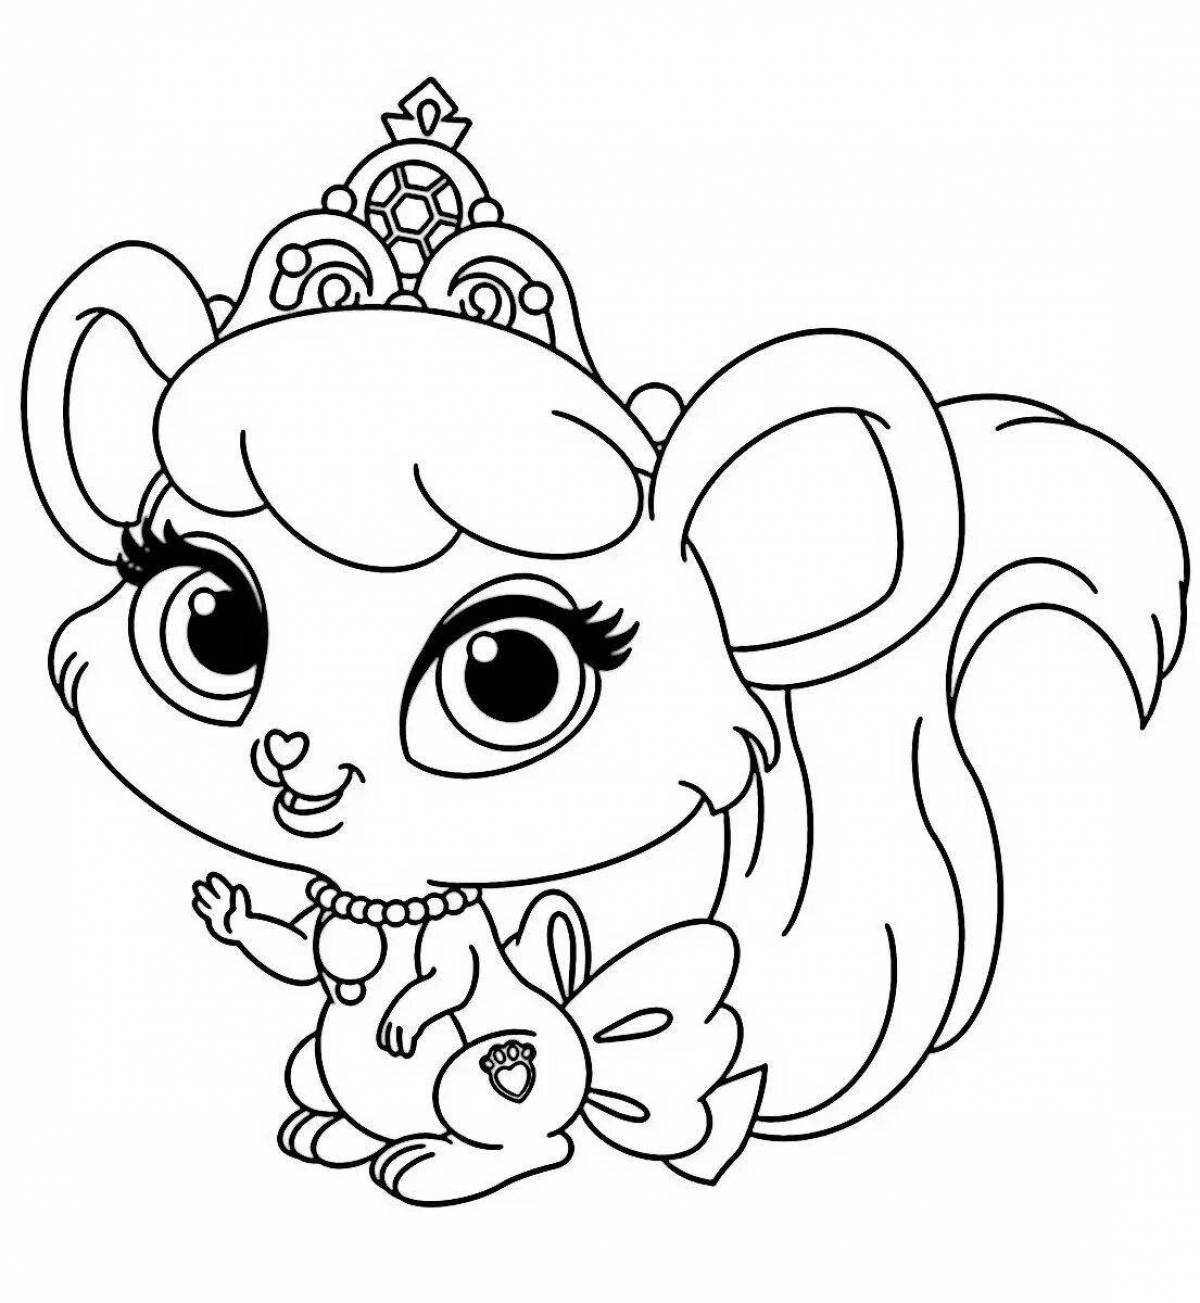 Adorable furry friends coloring page